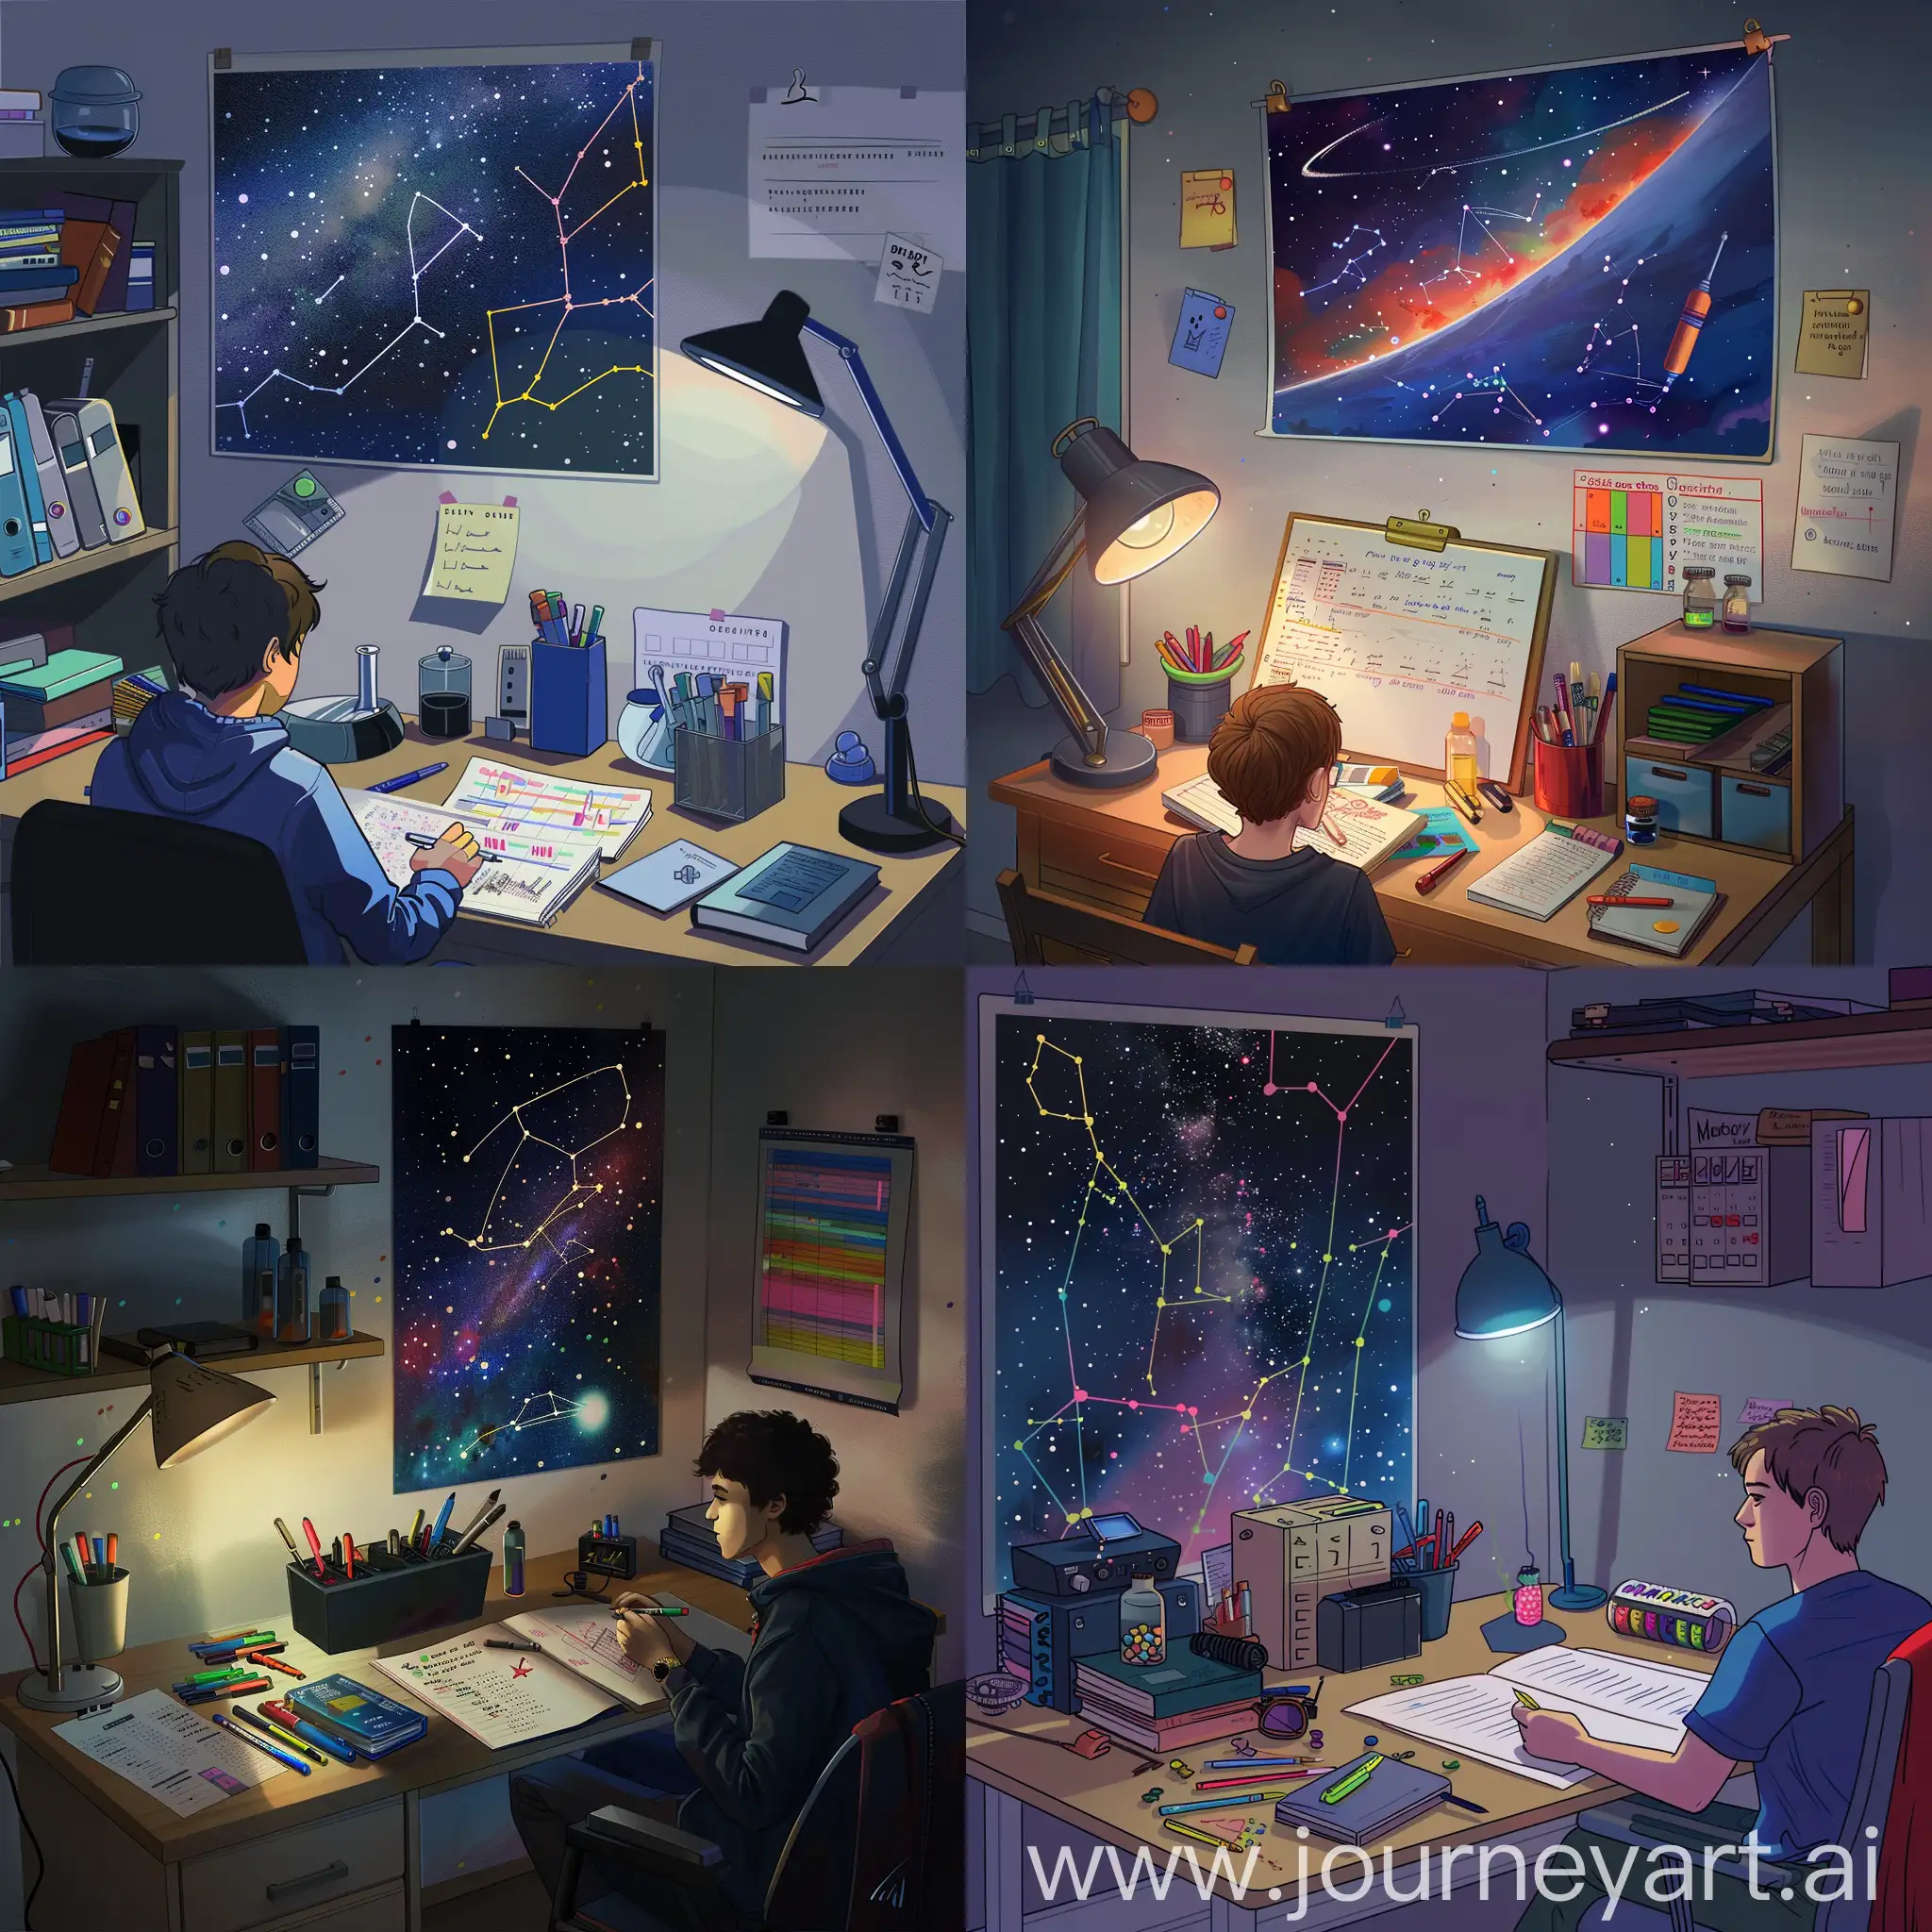 Enthusiastic-High-School-Student-Studying-Science-Under-Starry-Sky-Poster